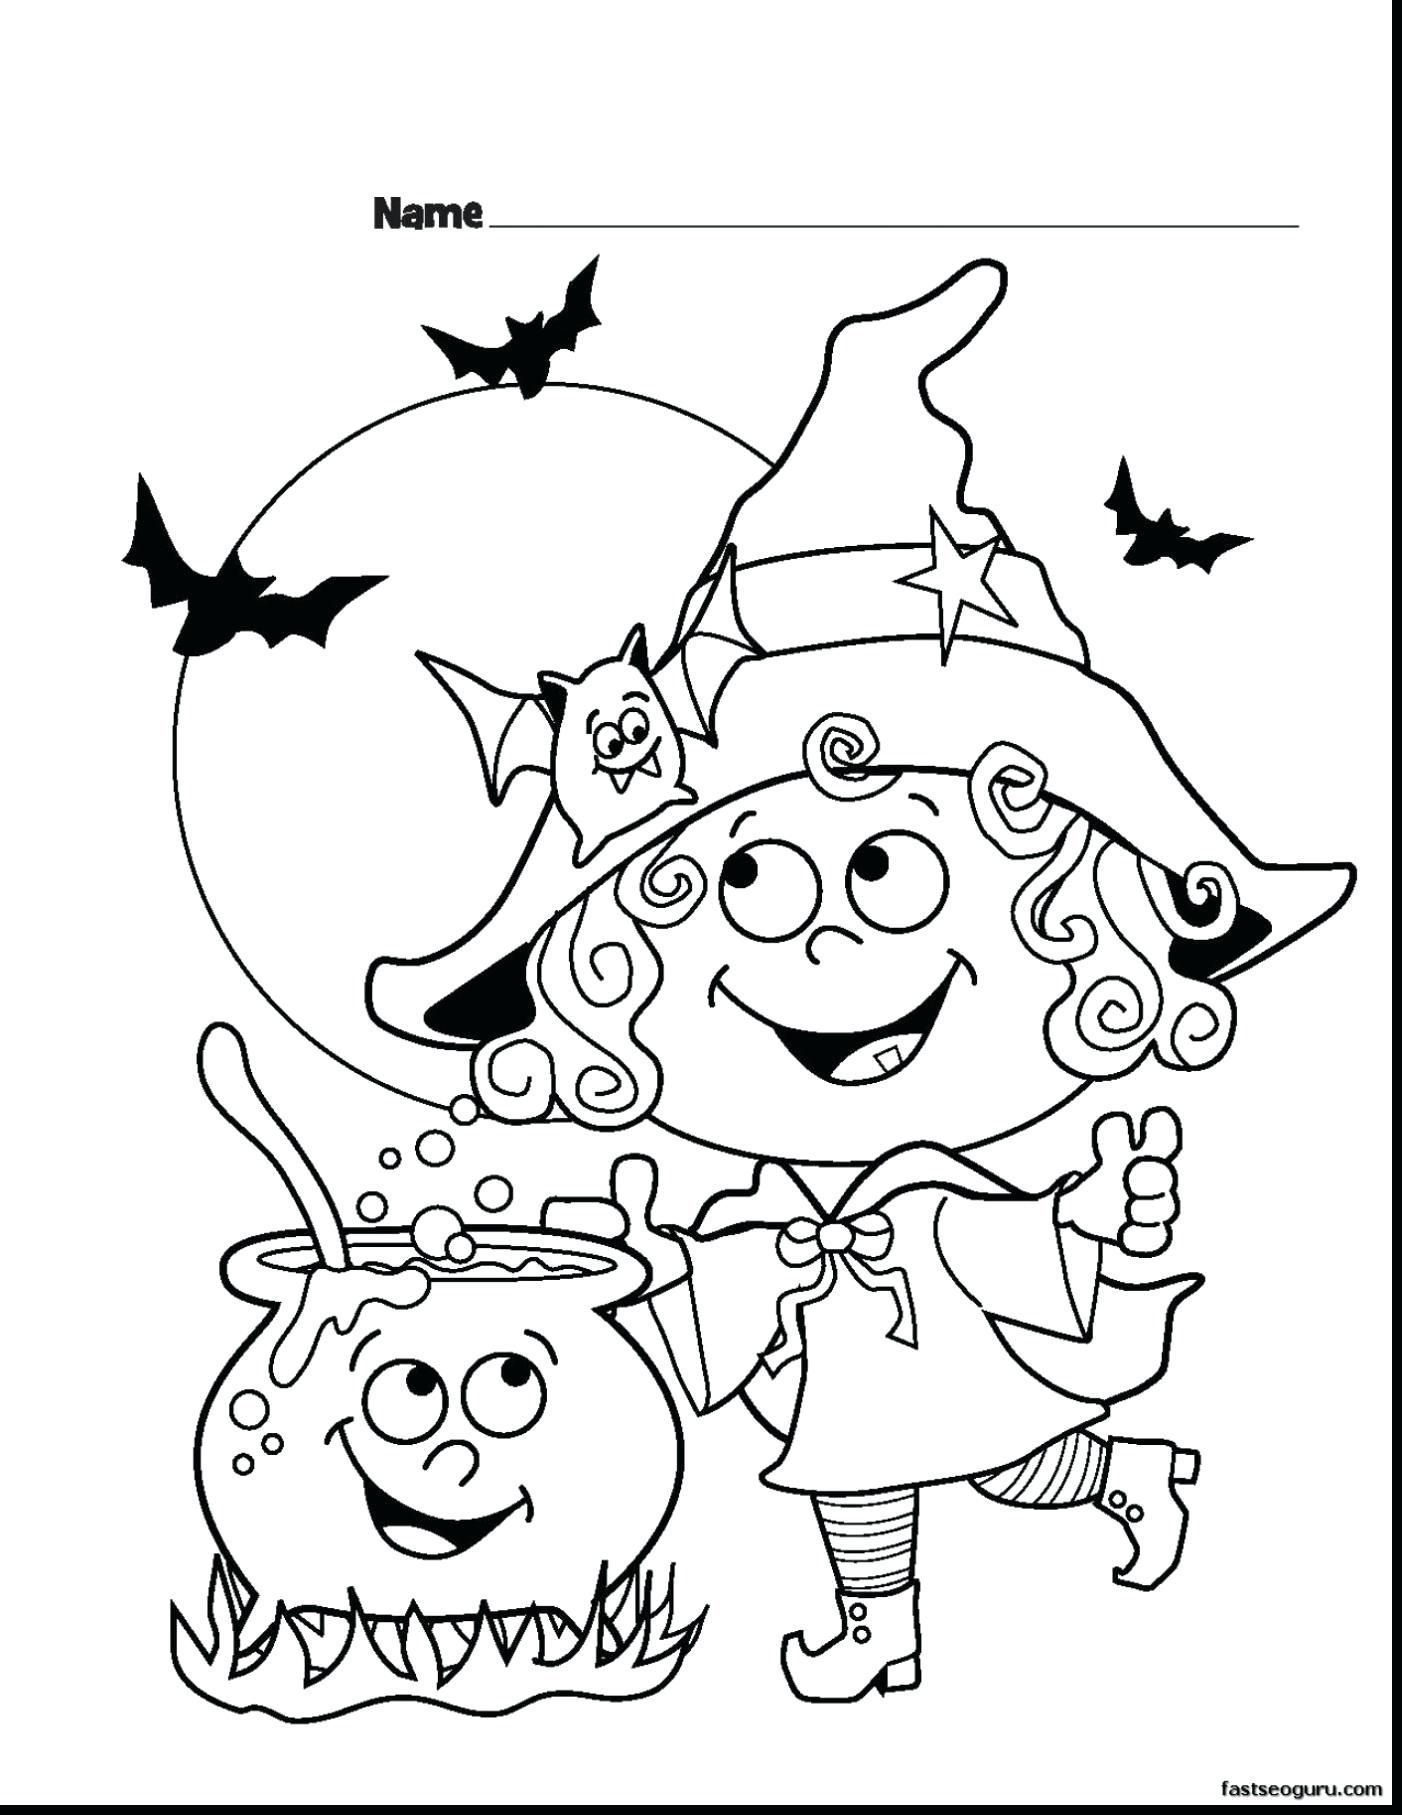 Printable Halloween Coloring Pages And Activities For Kids Free Ghost –  Dialogueeurope